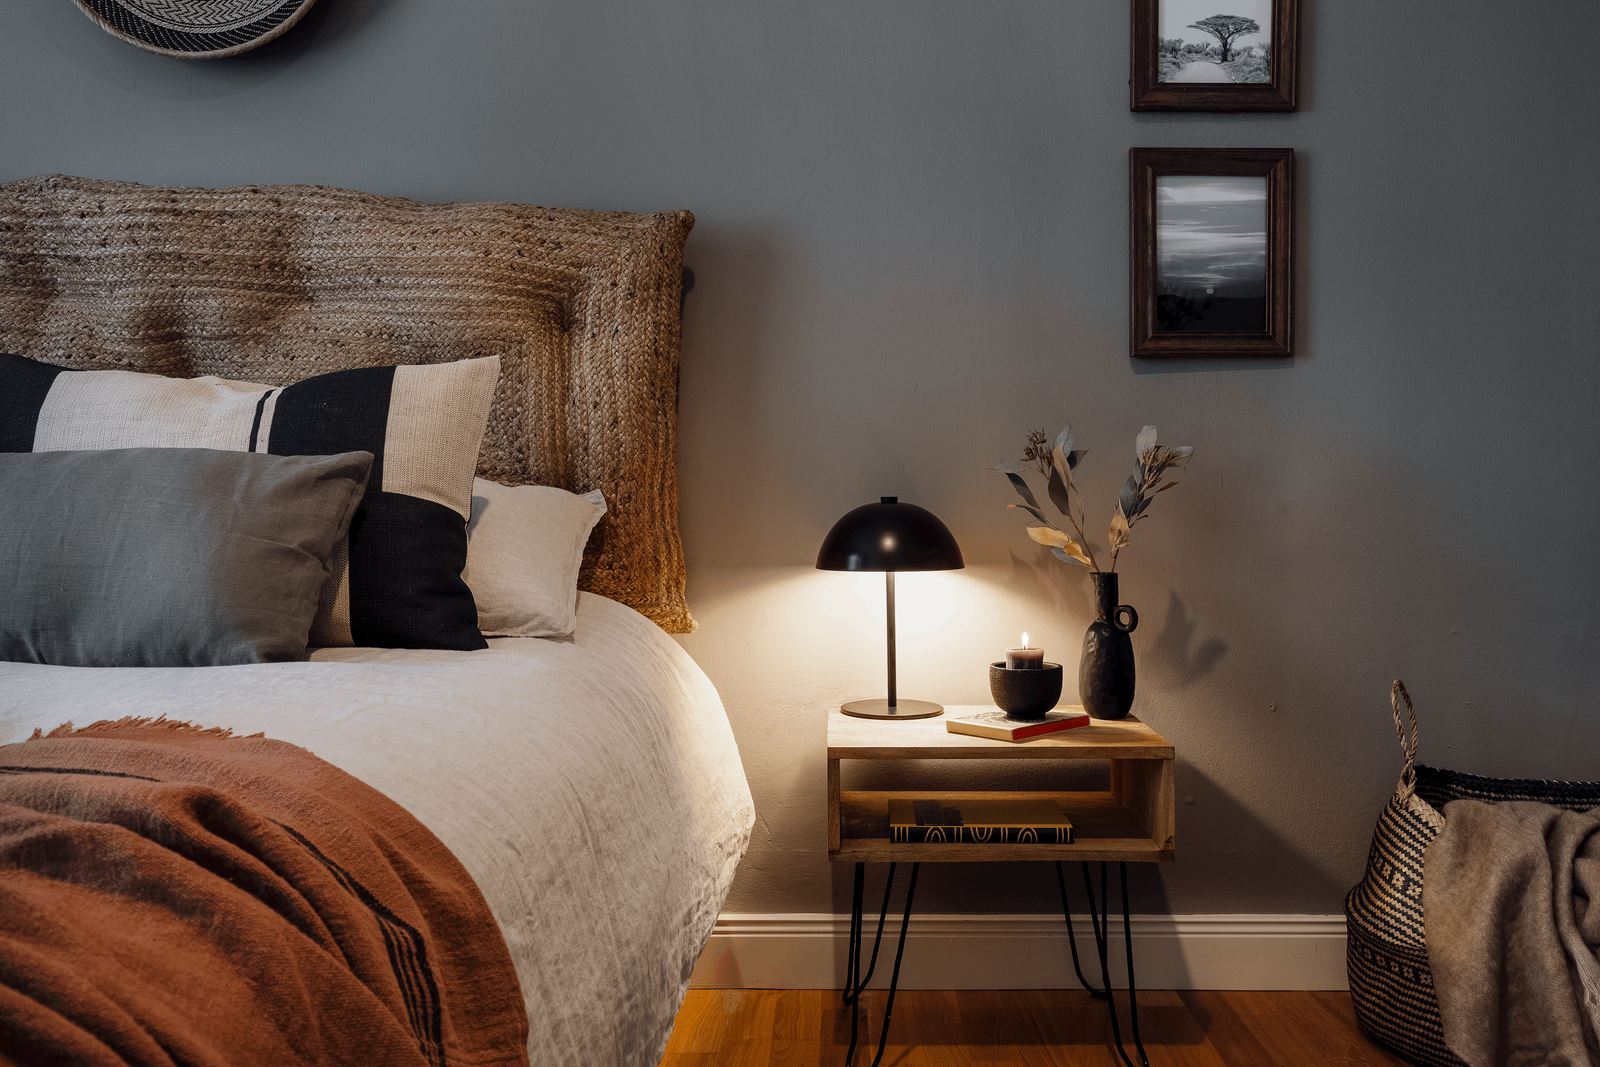 a bedroom with a bed, a nightstand, and pictures on the wall. Small wall frames, Zara home interiors, cosy bed, pillows on bed, wooden night stand, big basked for bedroom, interior designer by Aptó interiors Berlin home design, Amsterdam homes